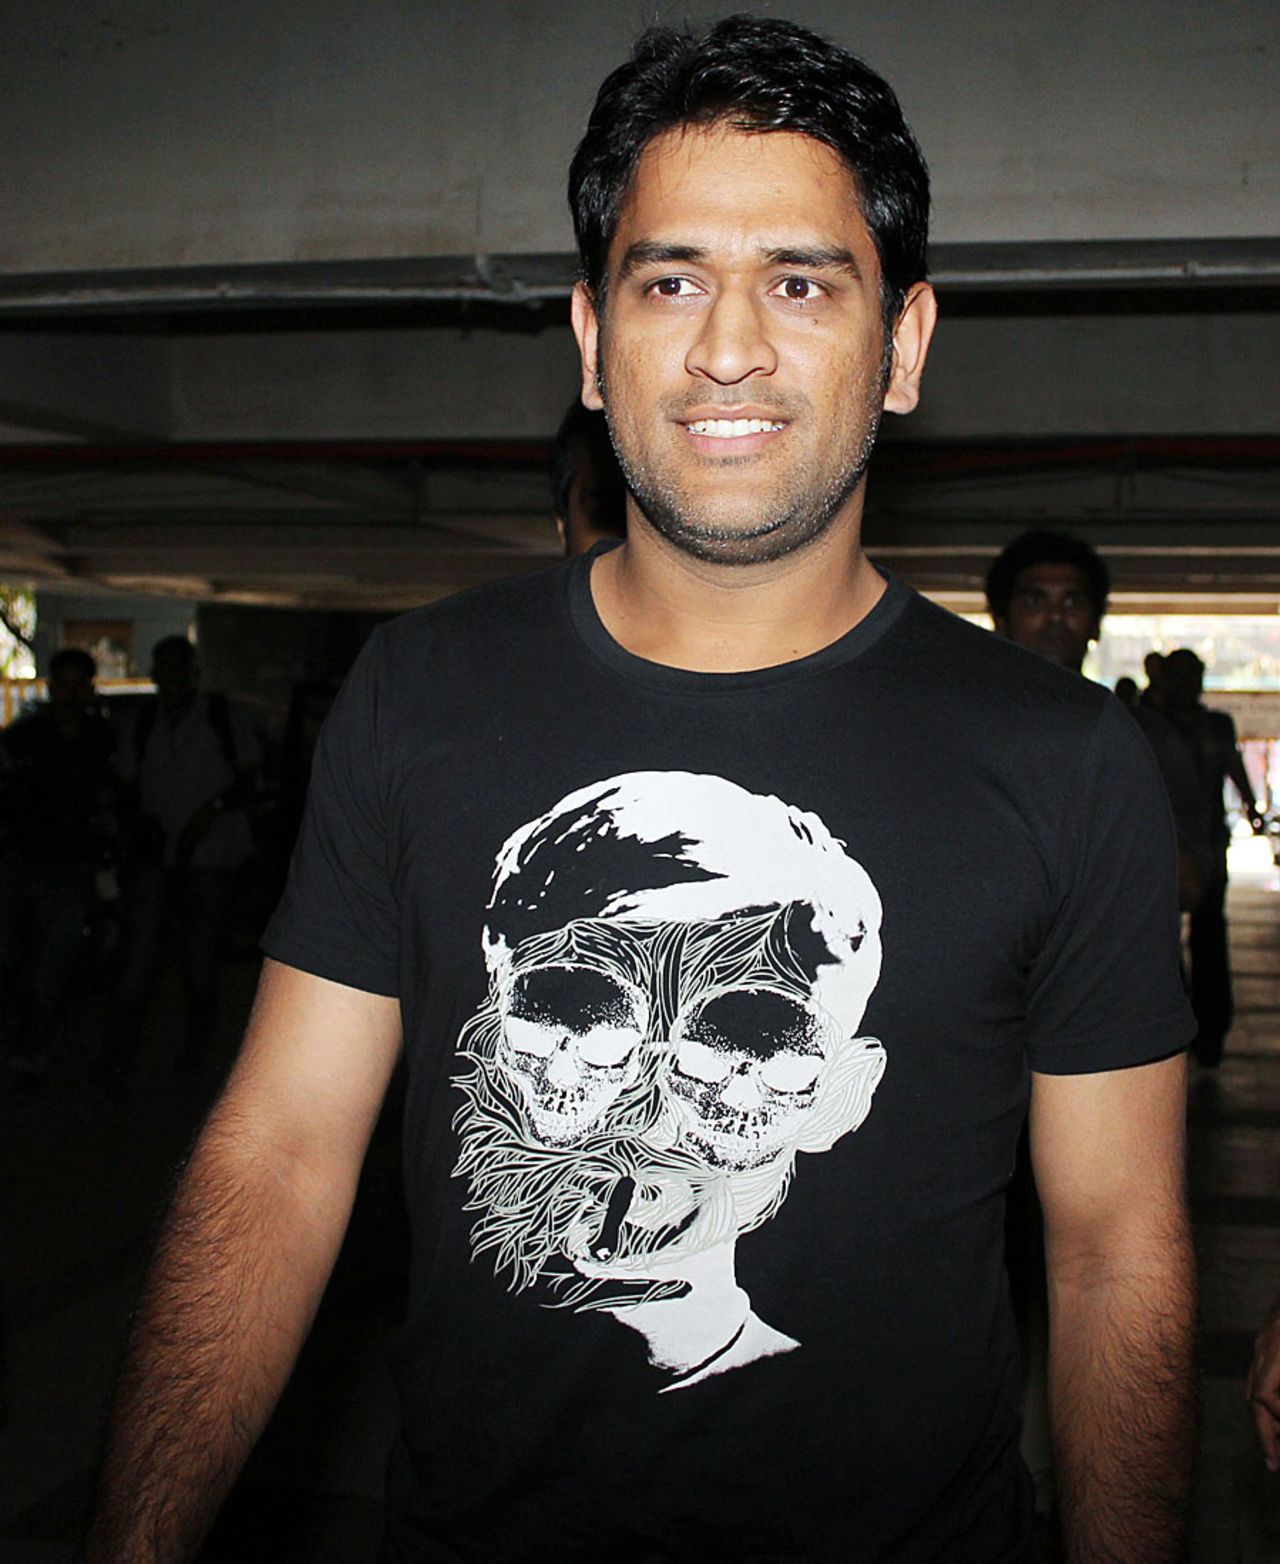 MS Dhoni arrives at the BCCI selection committee meeting, Mumbai, November 5, 2012